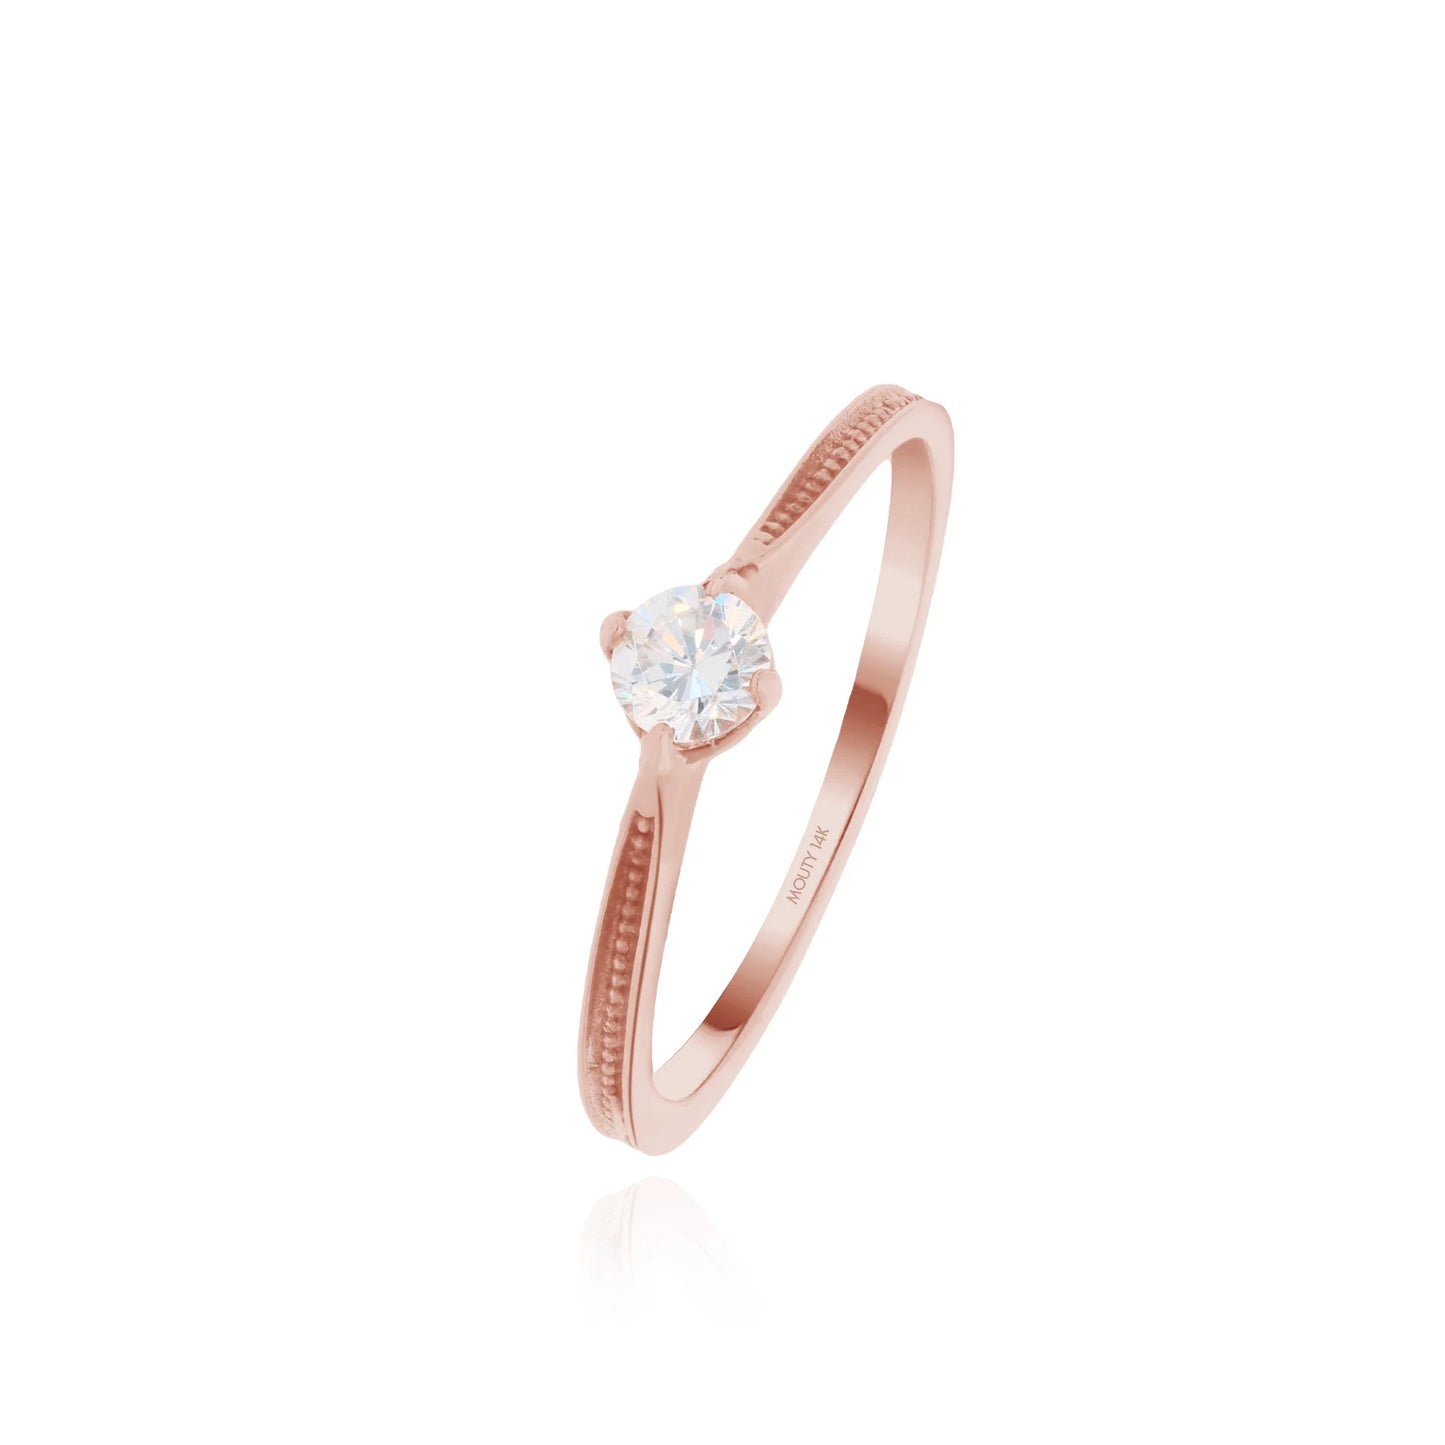 Lahia ring in 14k rose gold with zircons